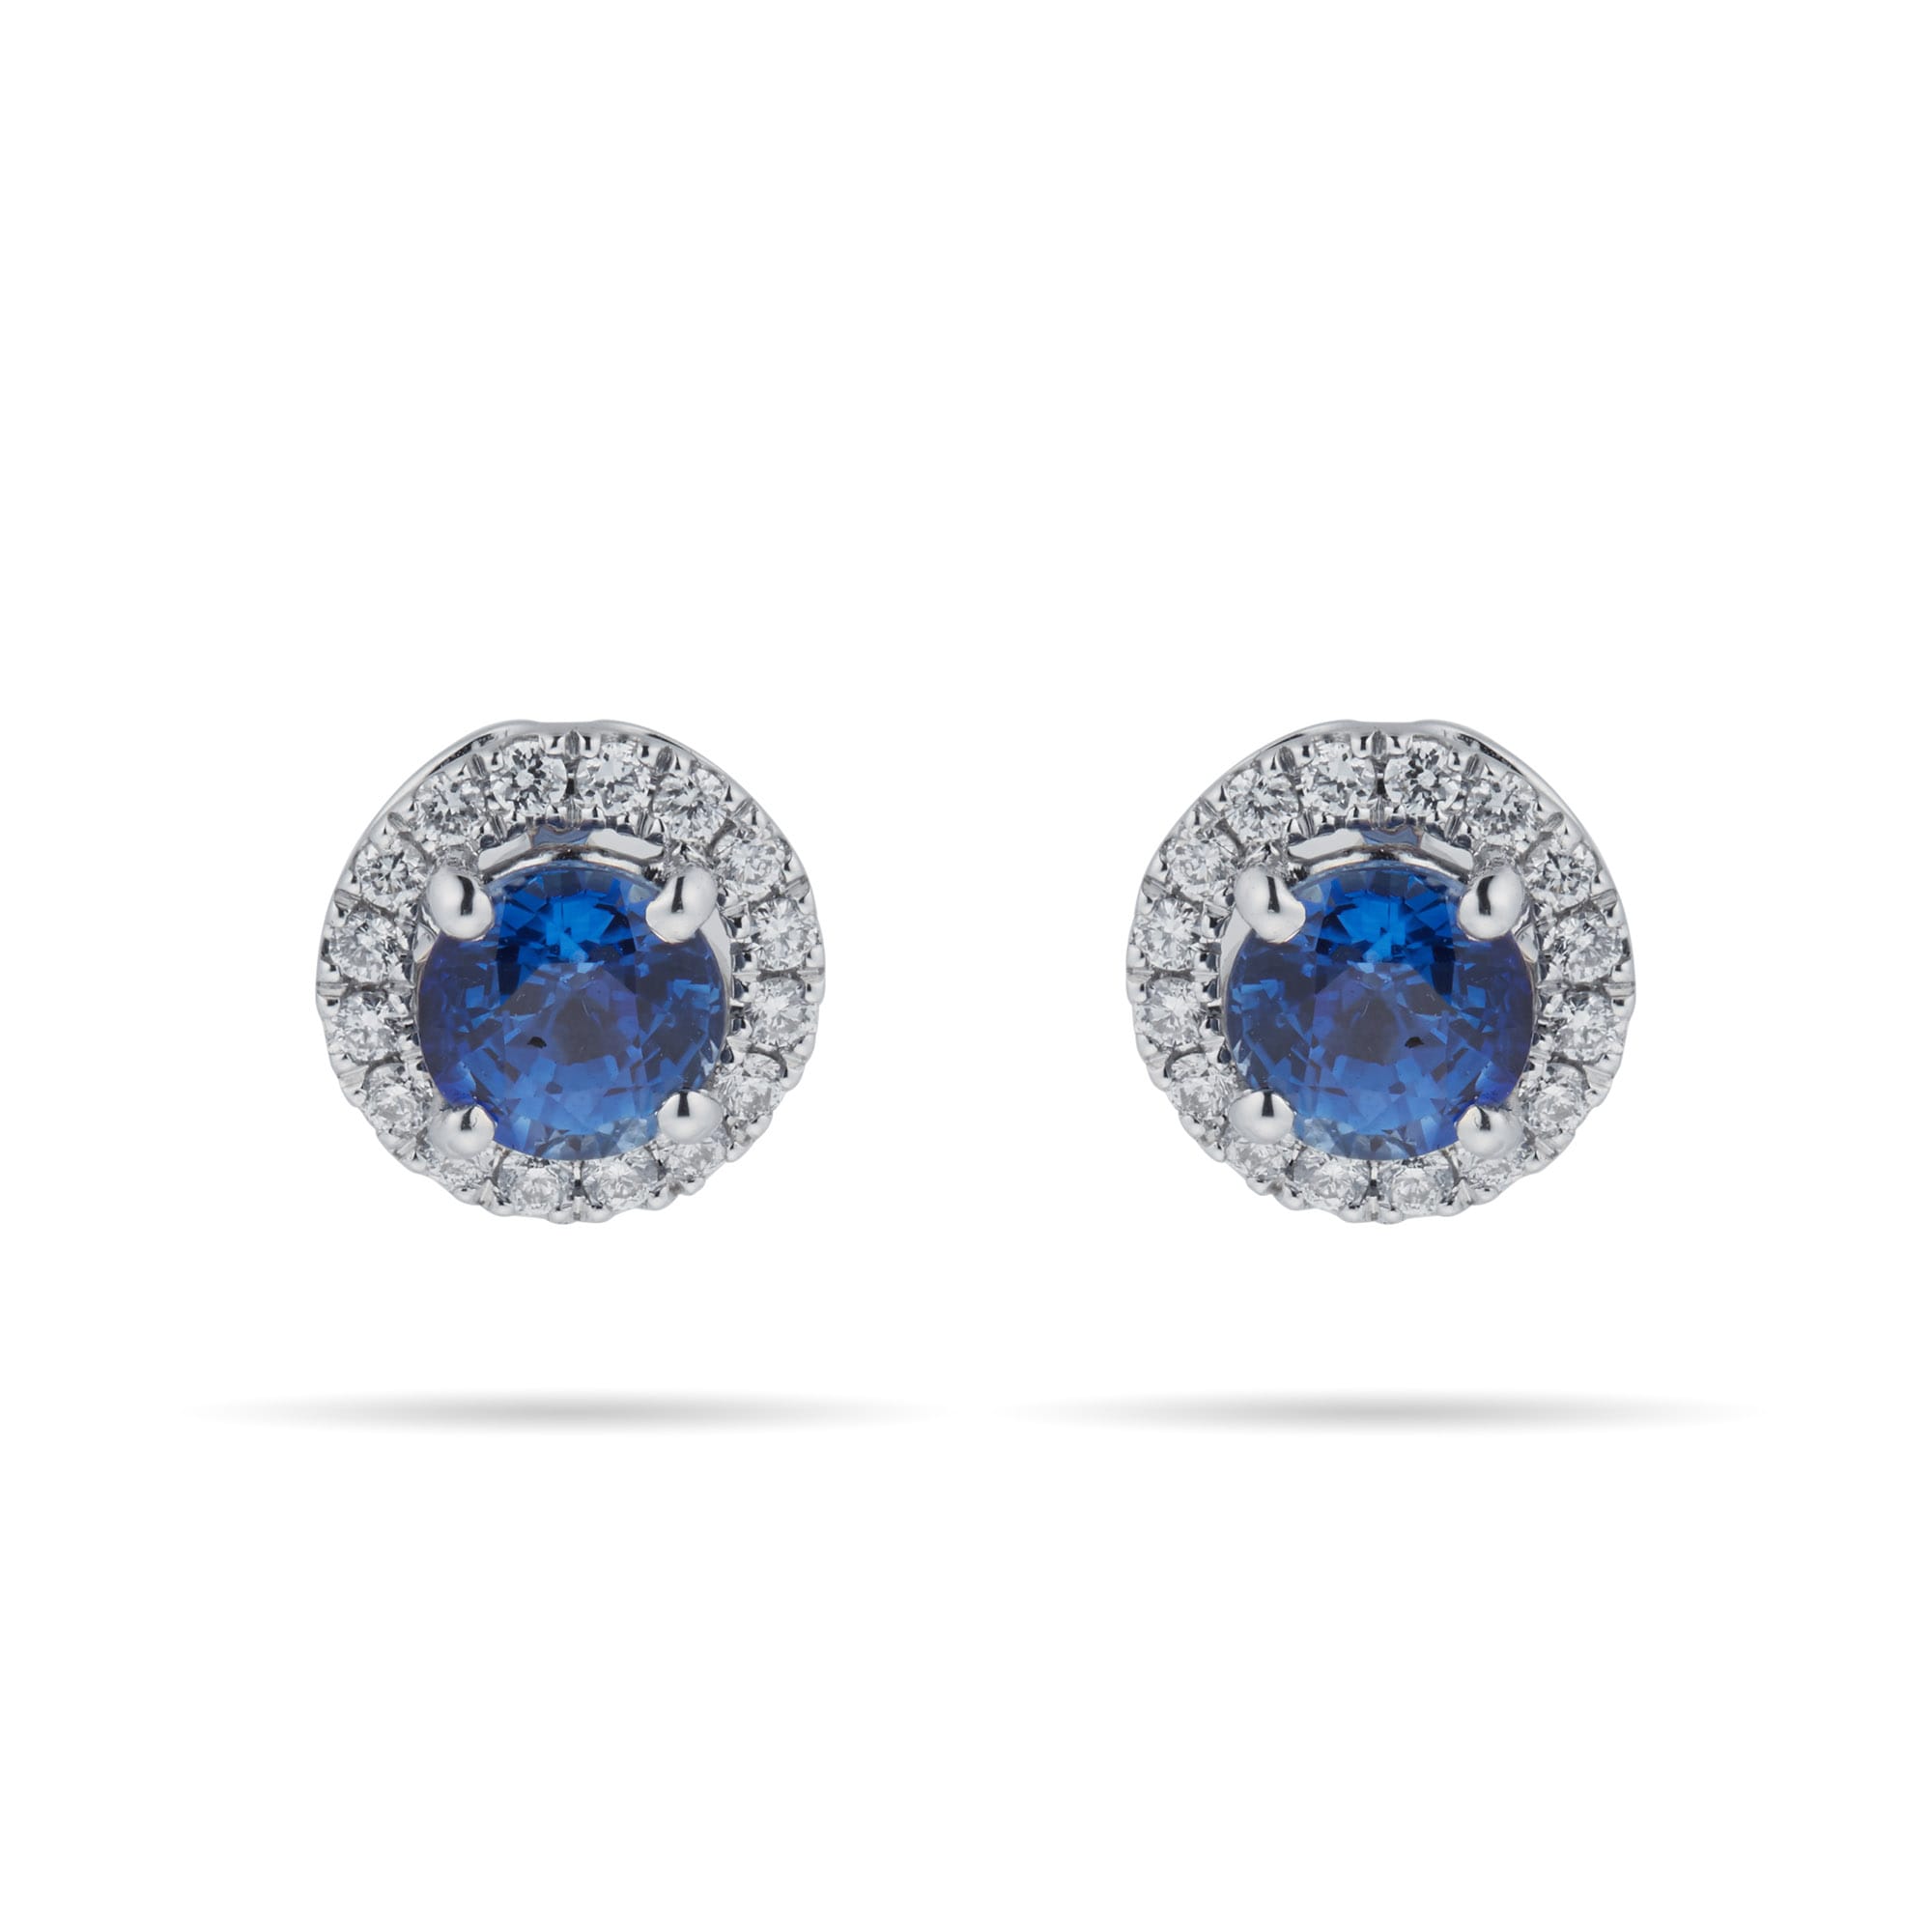 18k White Gold 0.15cttw Diamond And Sapphire Stud Earrings